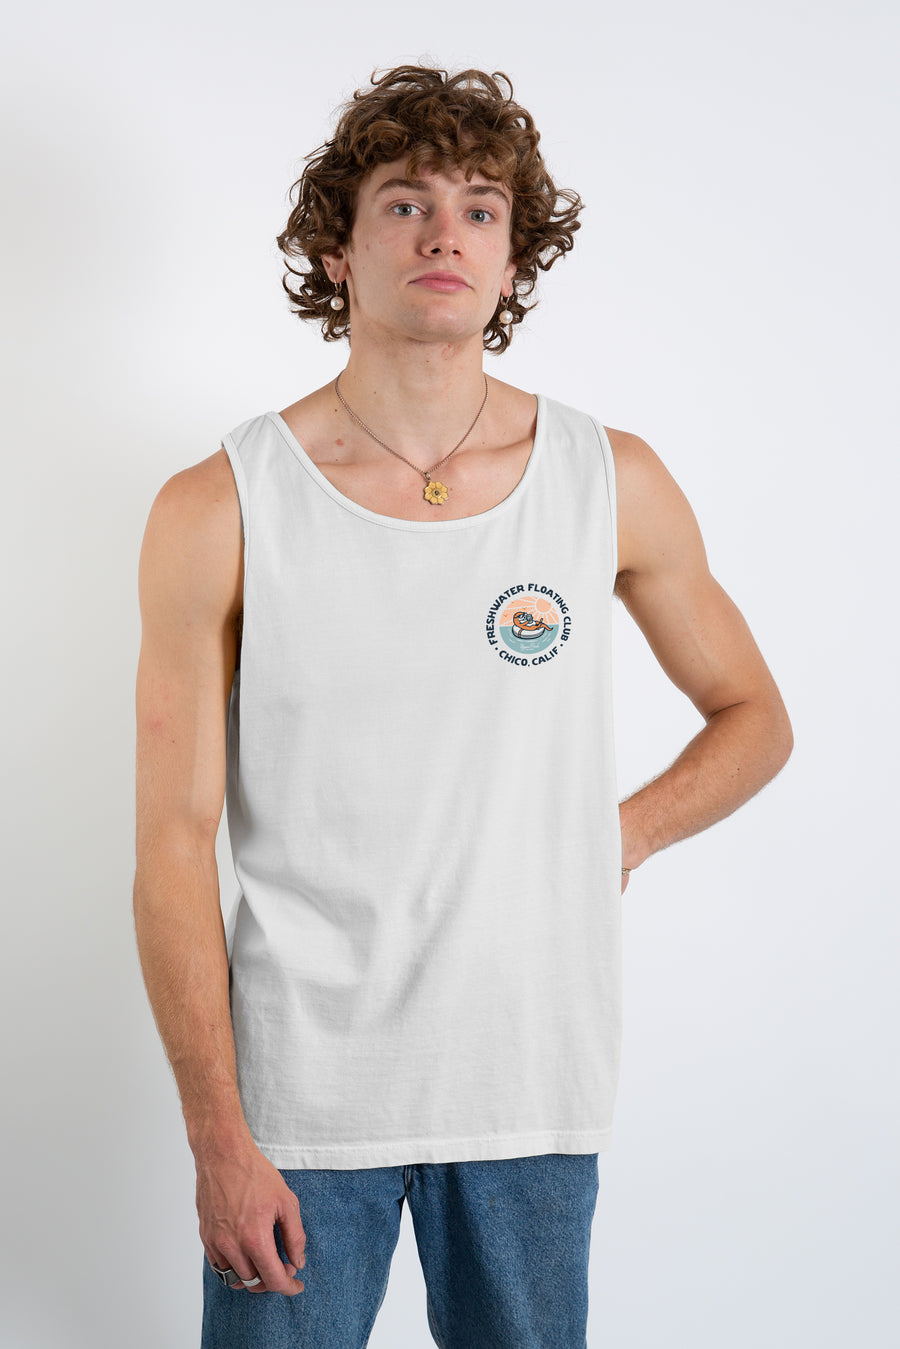 man standing in a photography studio wearing a Freshwater Floating Club washed tank top from Upper Park Clothing